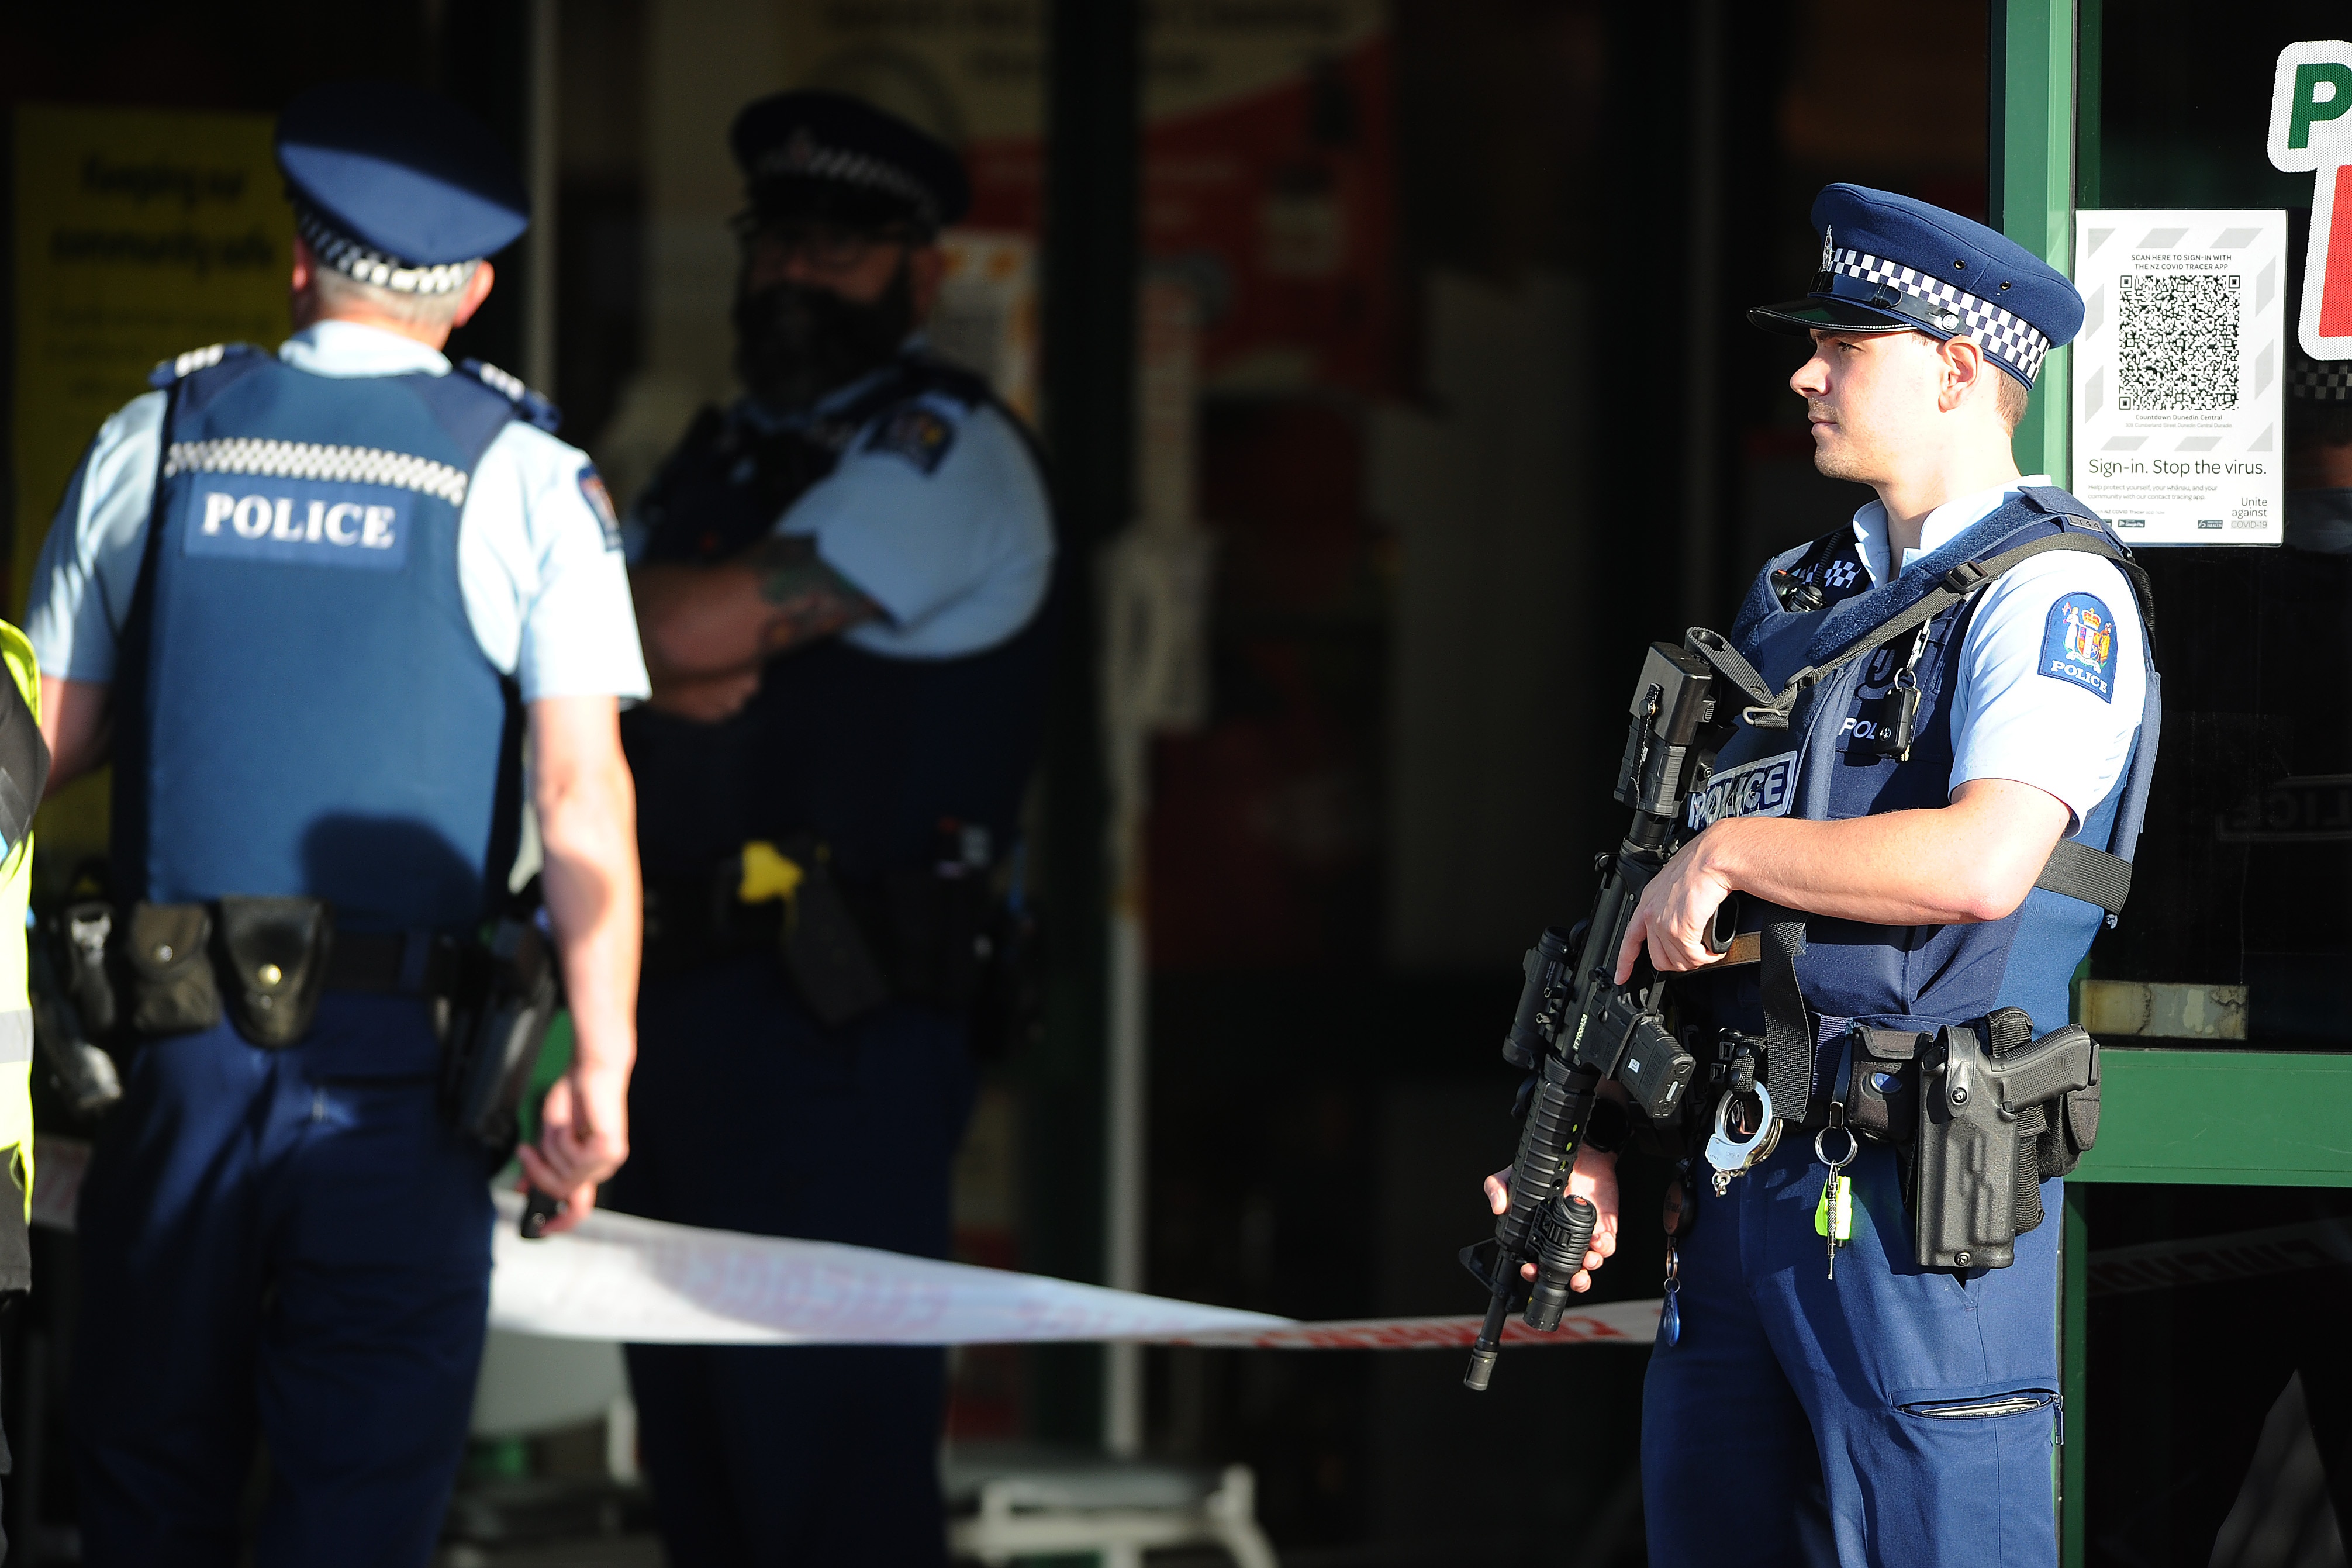 Police officers are observed standing guard outside the main entrance of the Dunedin Central Countdown on 10 May, 2021 in Dunedin, New Zealand. 